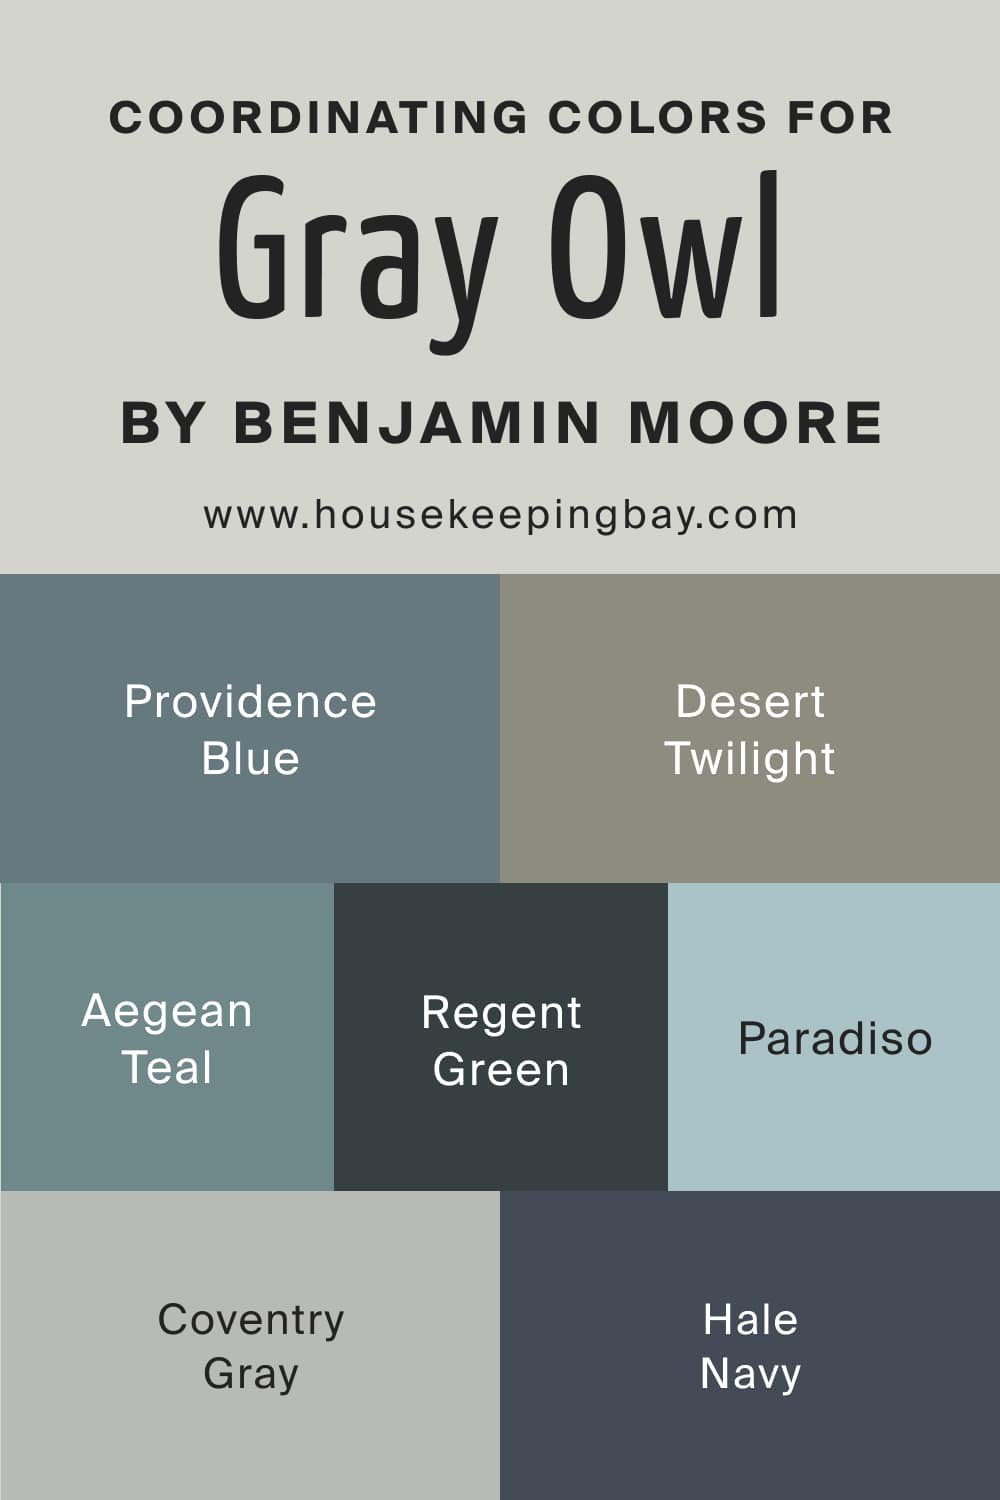 Coordinating Colors for Gray Owl 2137 60 by Benjamin Moore